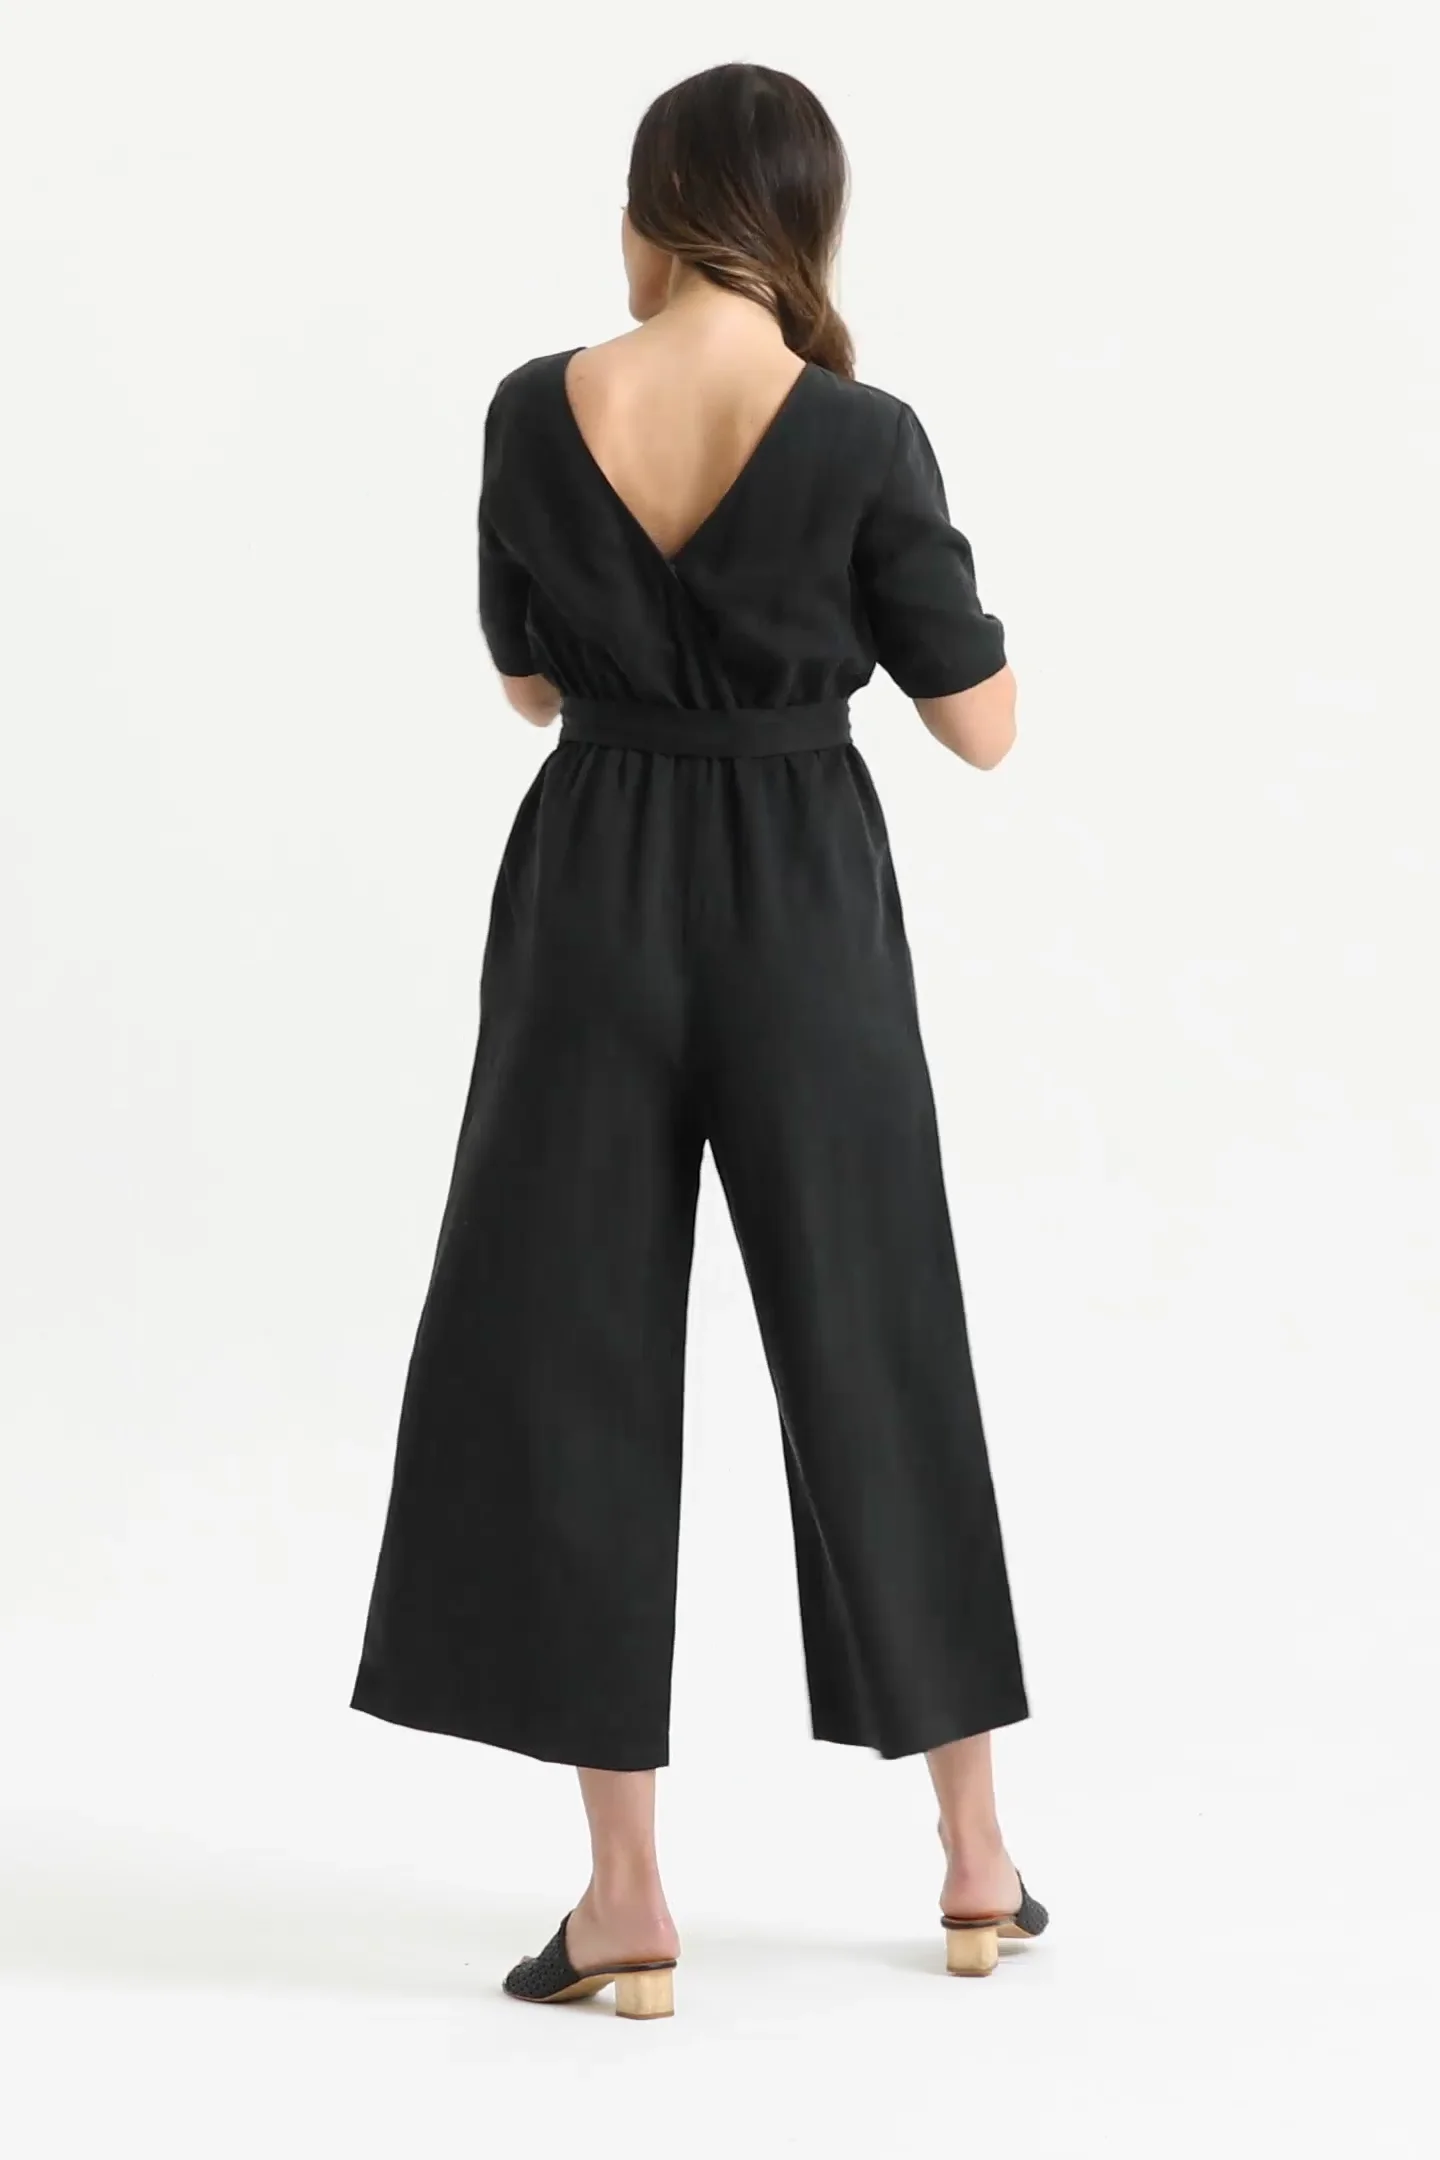 How to Wear The Wrap Jumpsuit on Vimeo